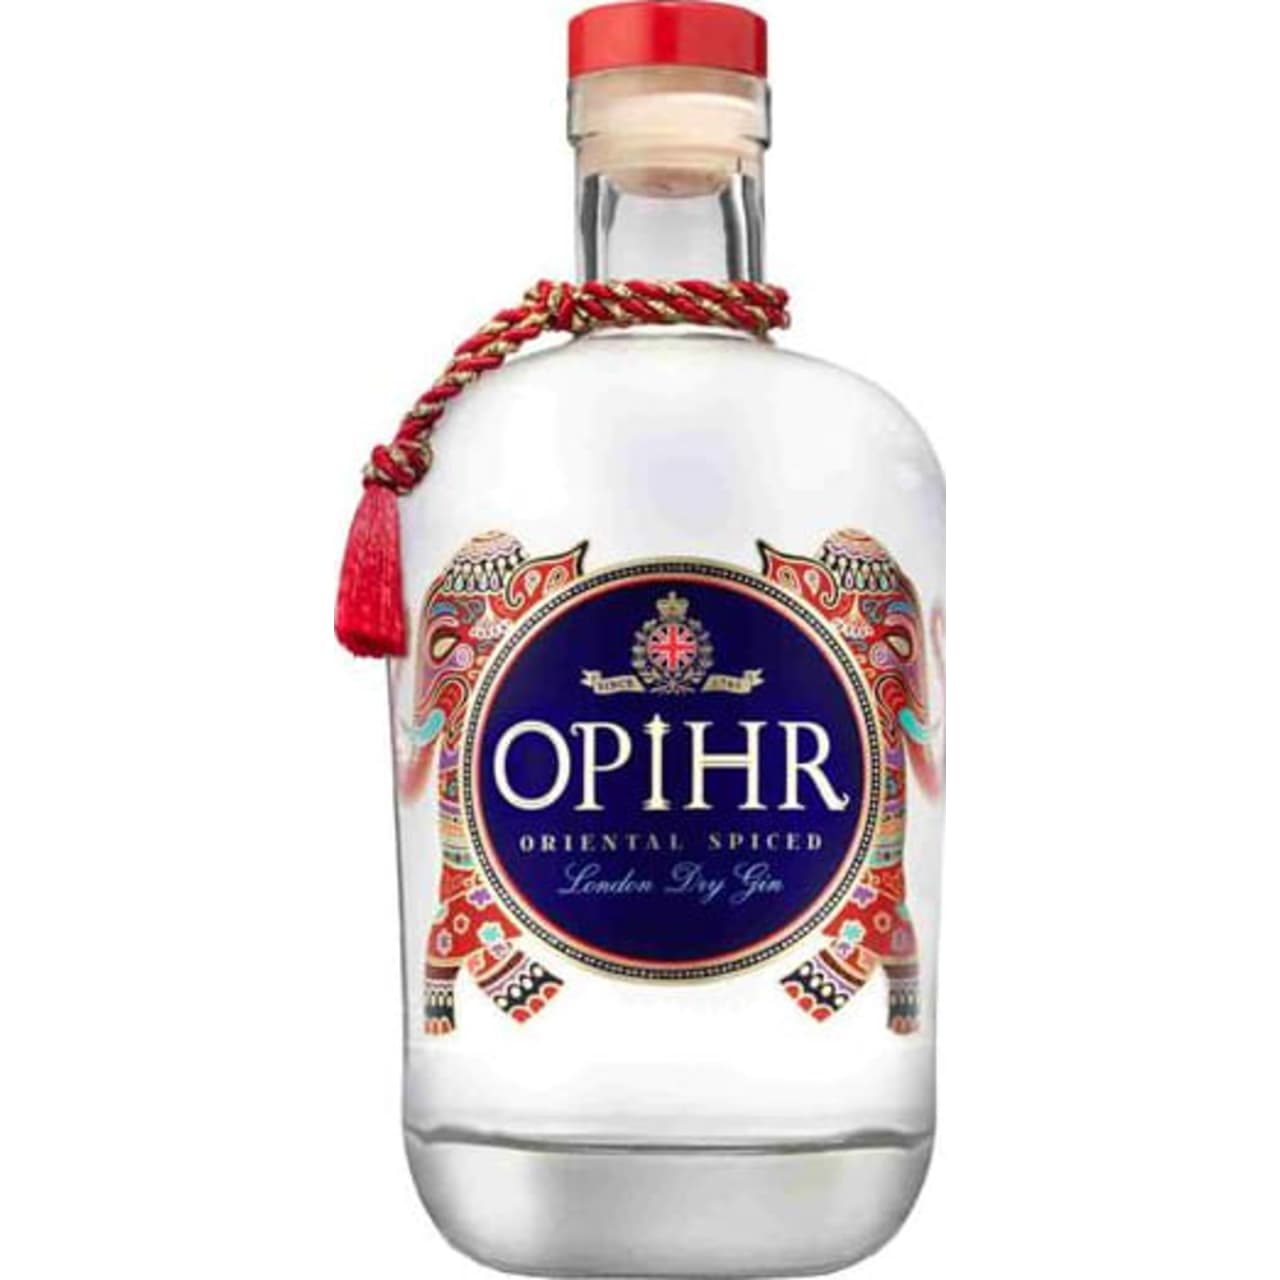 Opihr is a bold, richly intense exotic gin. It has smooth soft perfume notes with sharp bursts of citrus and a lingering but soft spice on the palate.